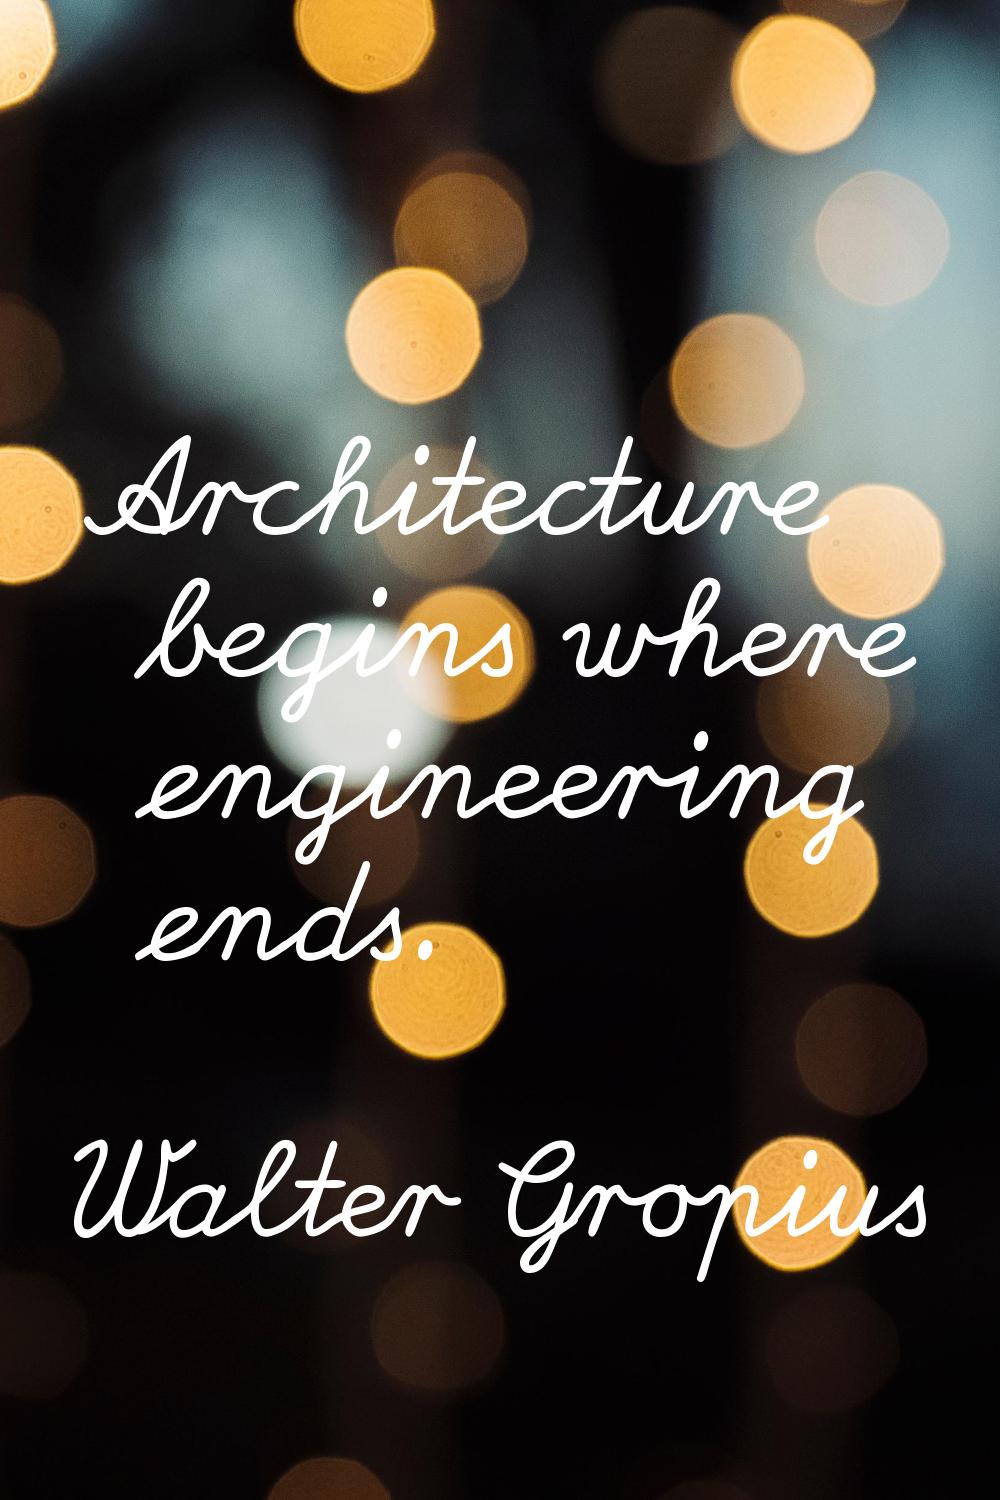 Architecture begins where engineering ends.